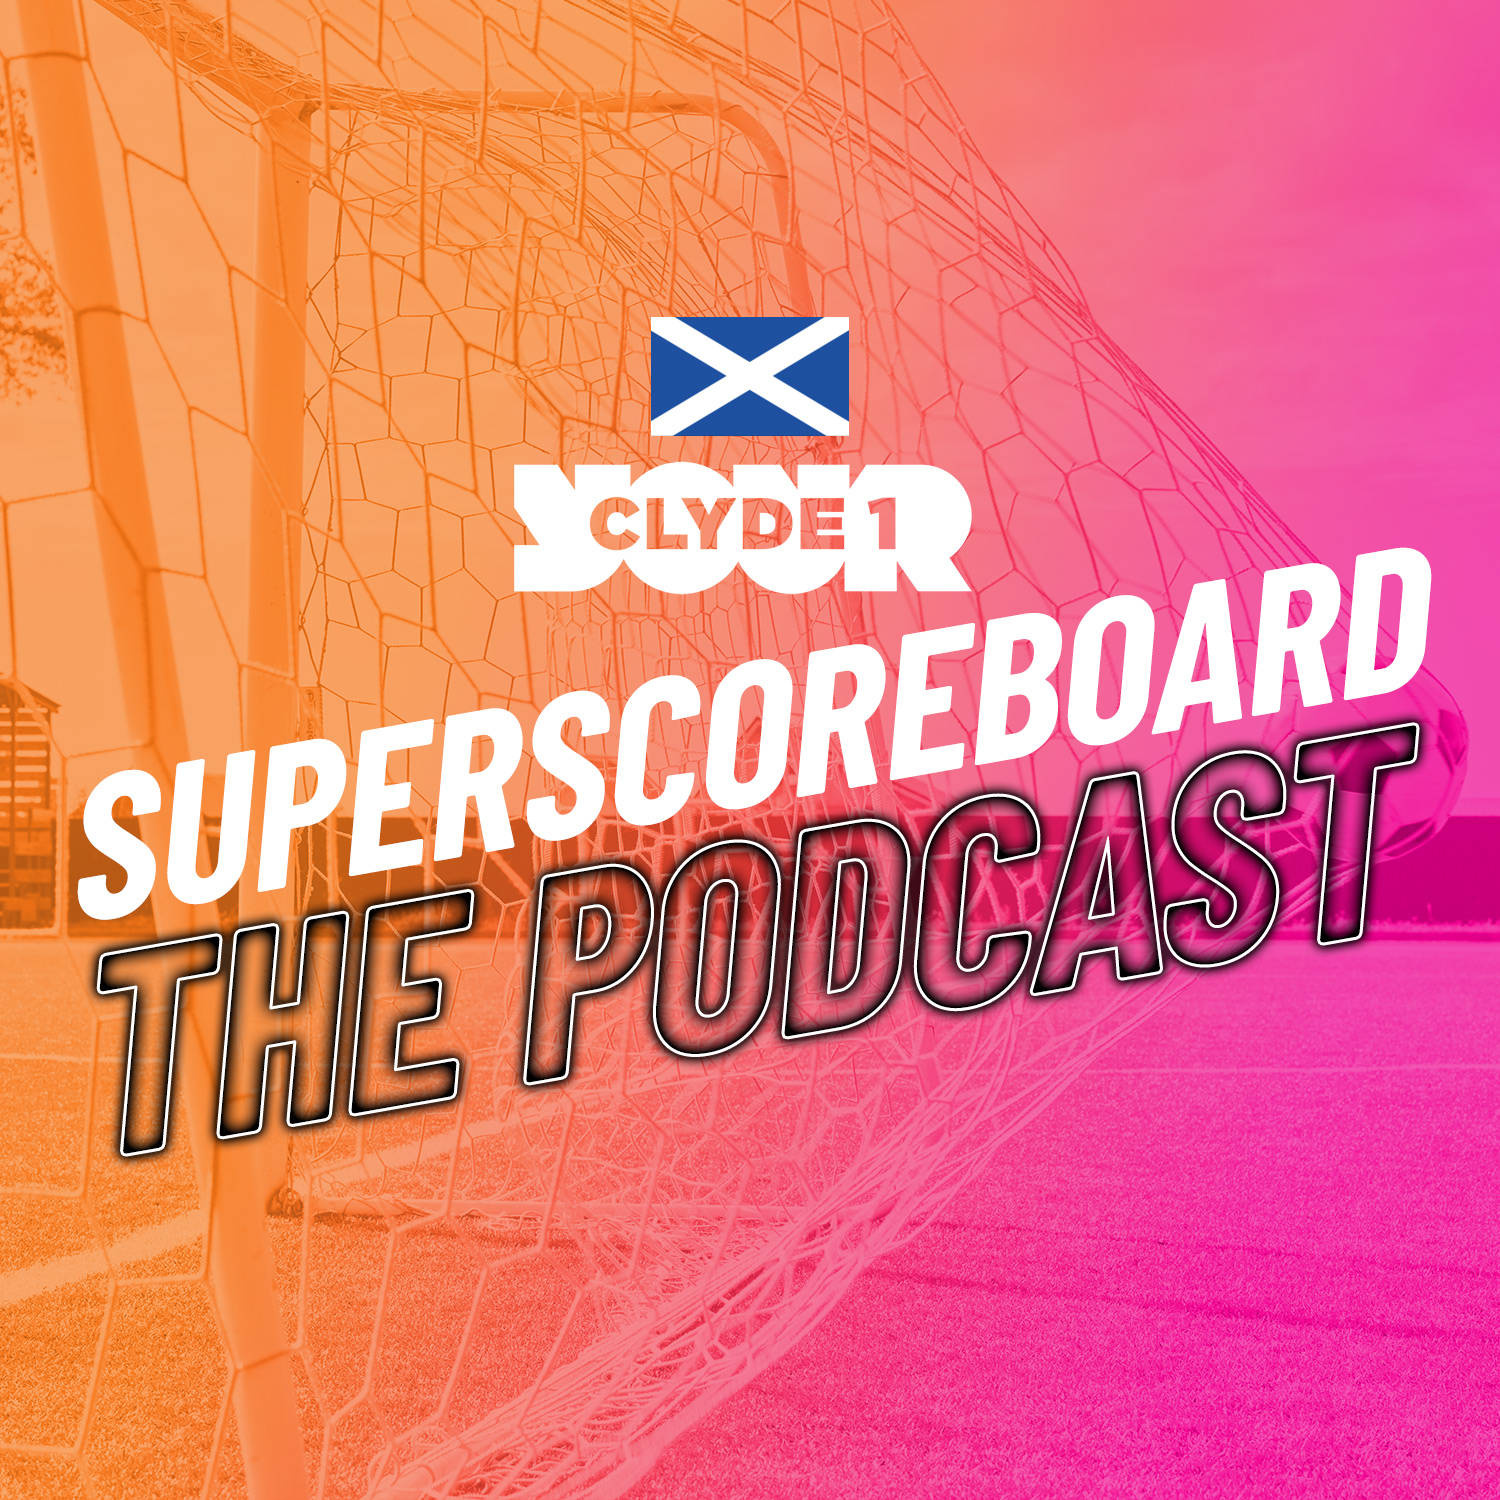 Wednesday 8th May Clyde 1 Superscoreboard